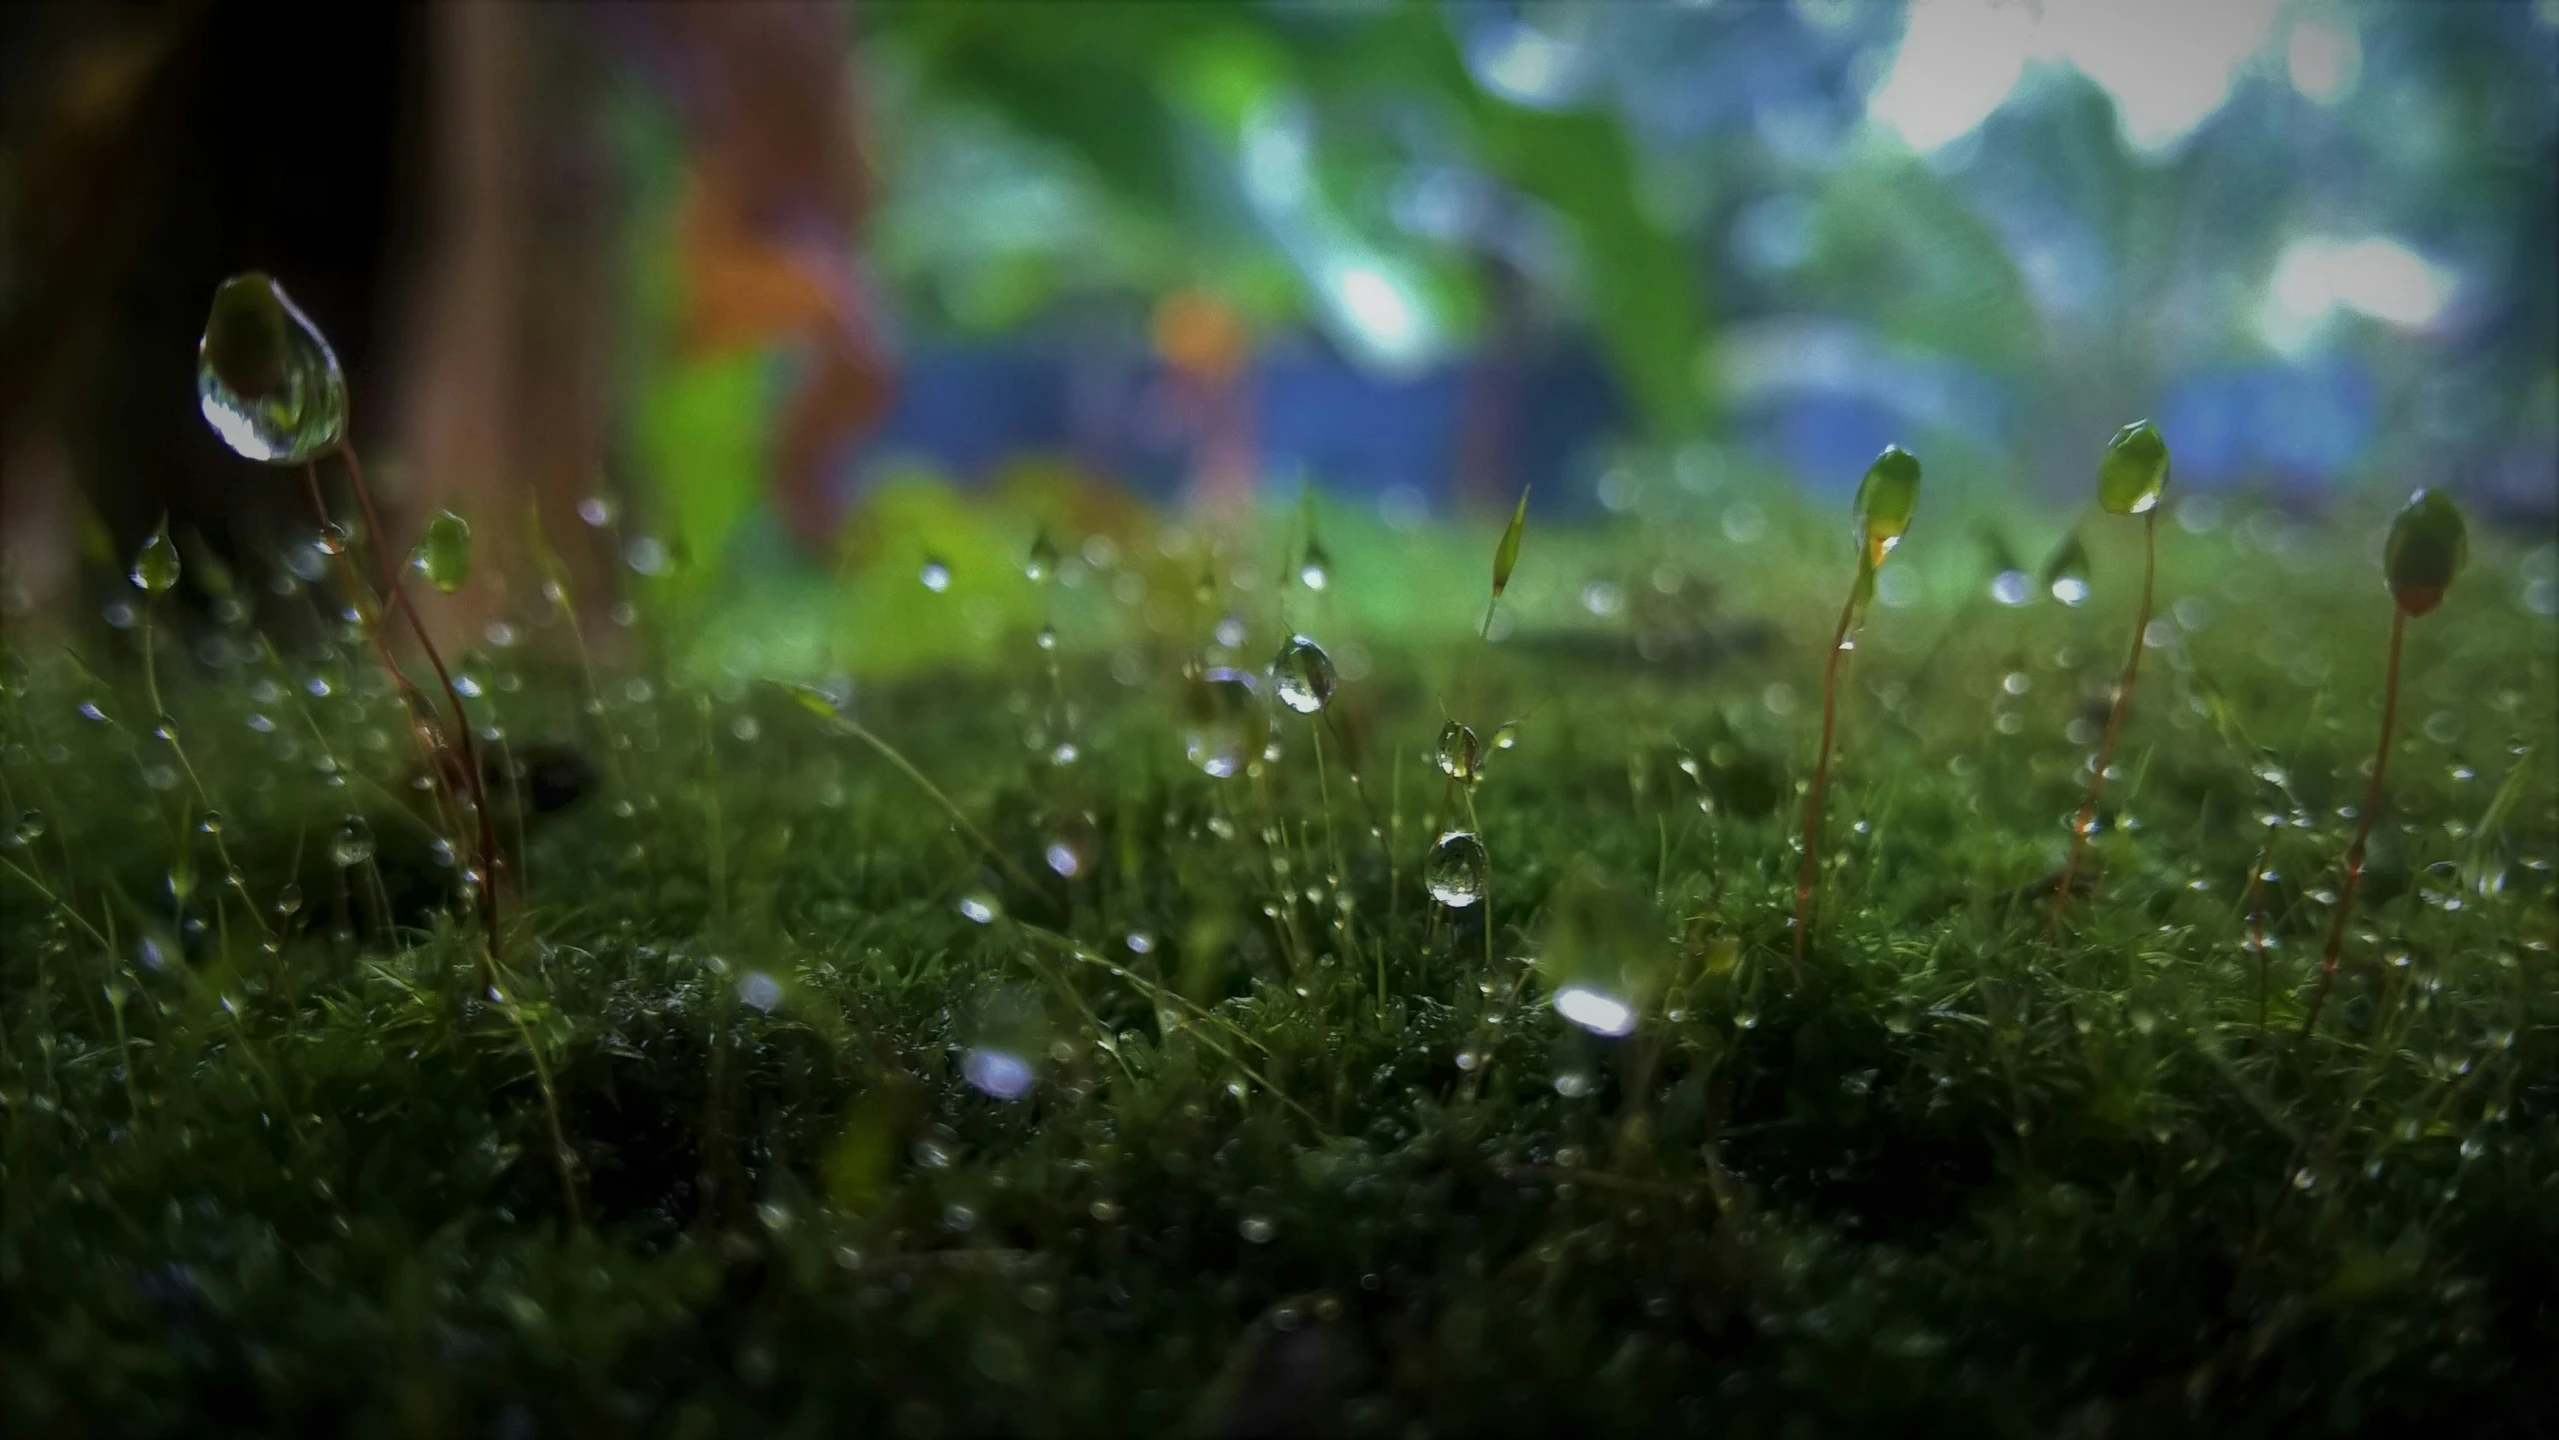 wet and green grass with drops of dew